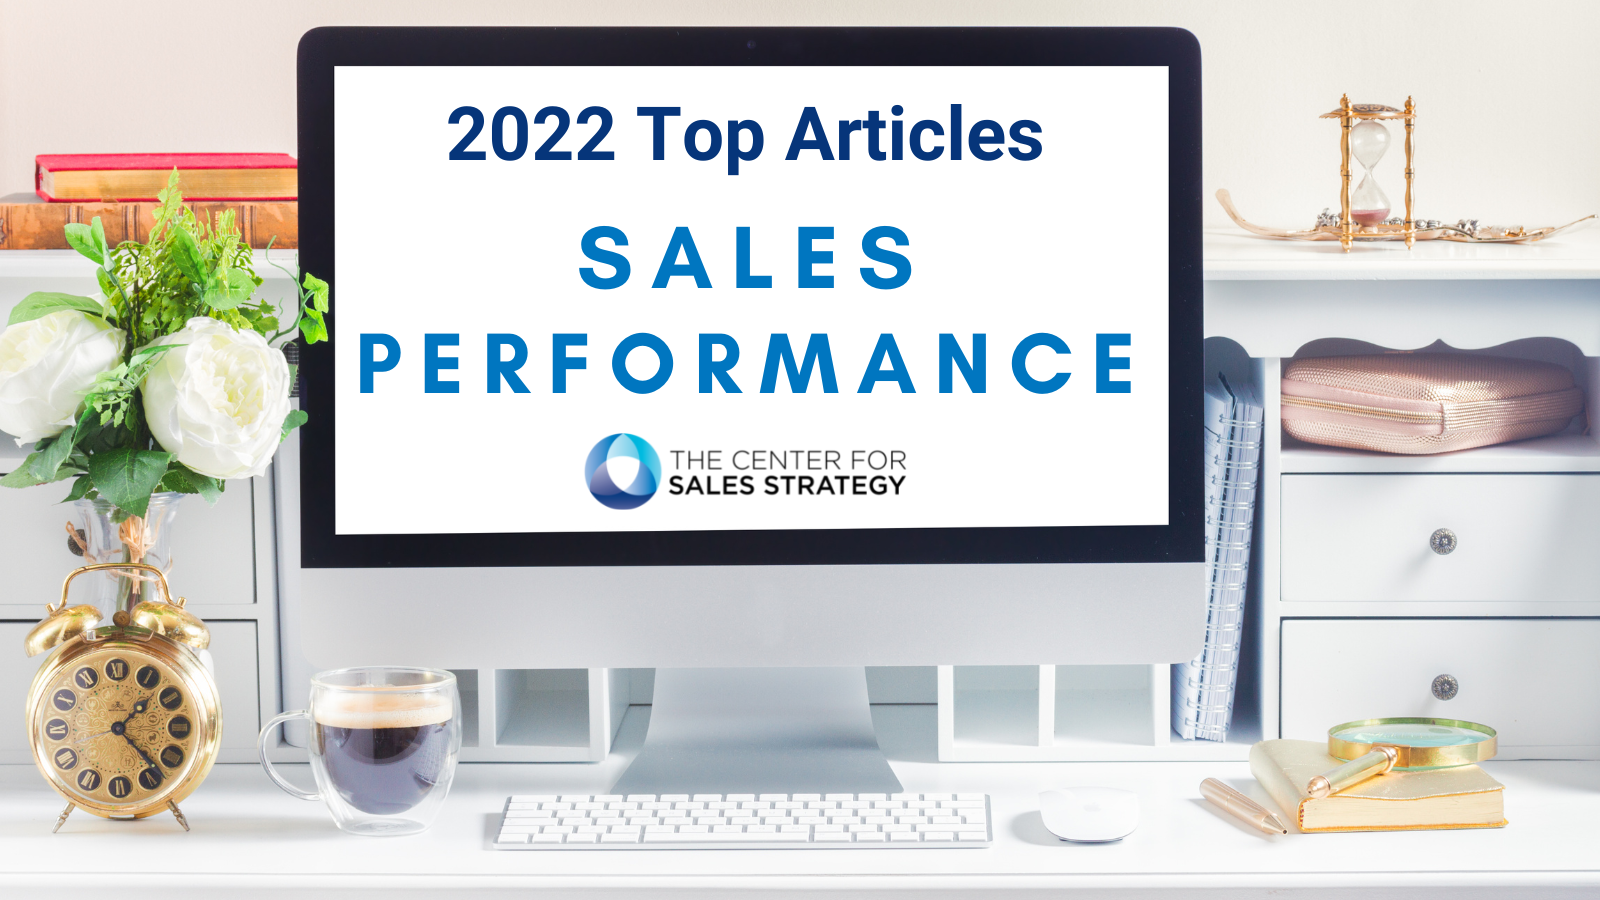 Top 2022 Articles Sales Performance